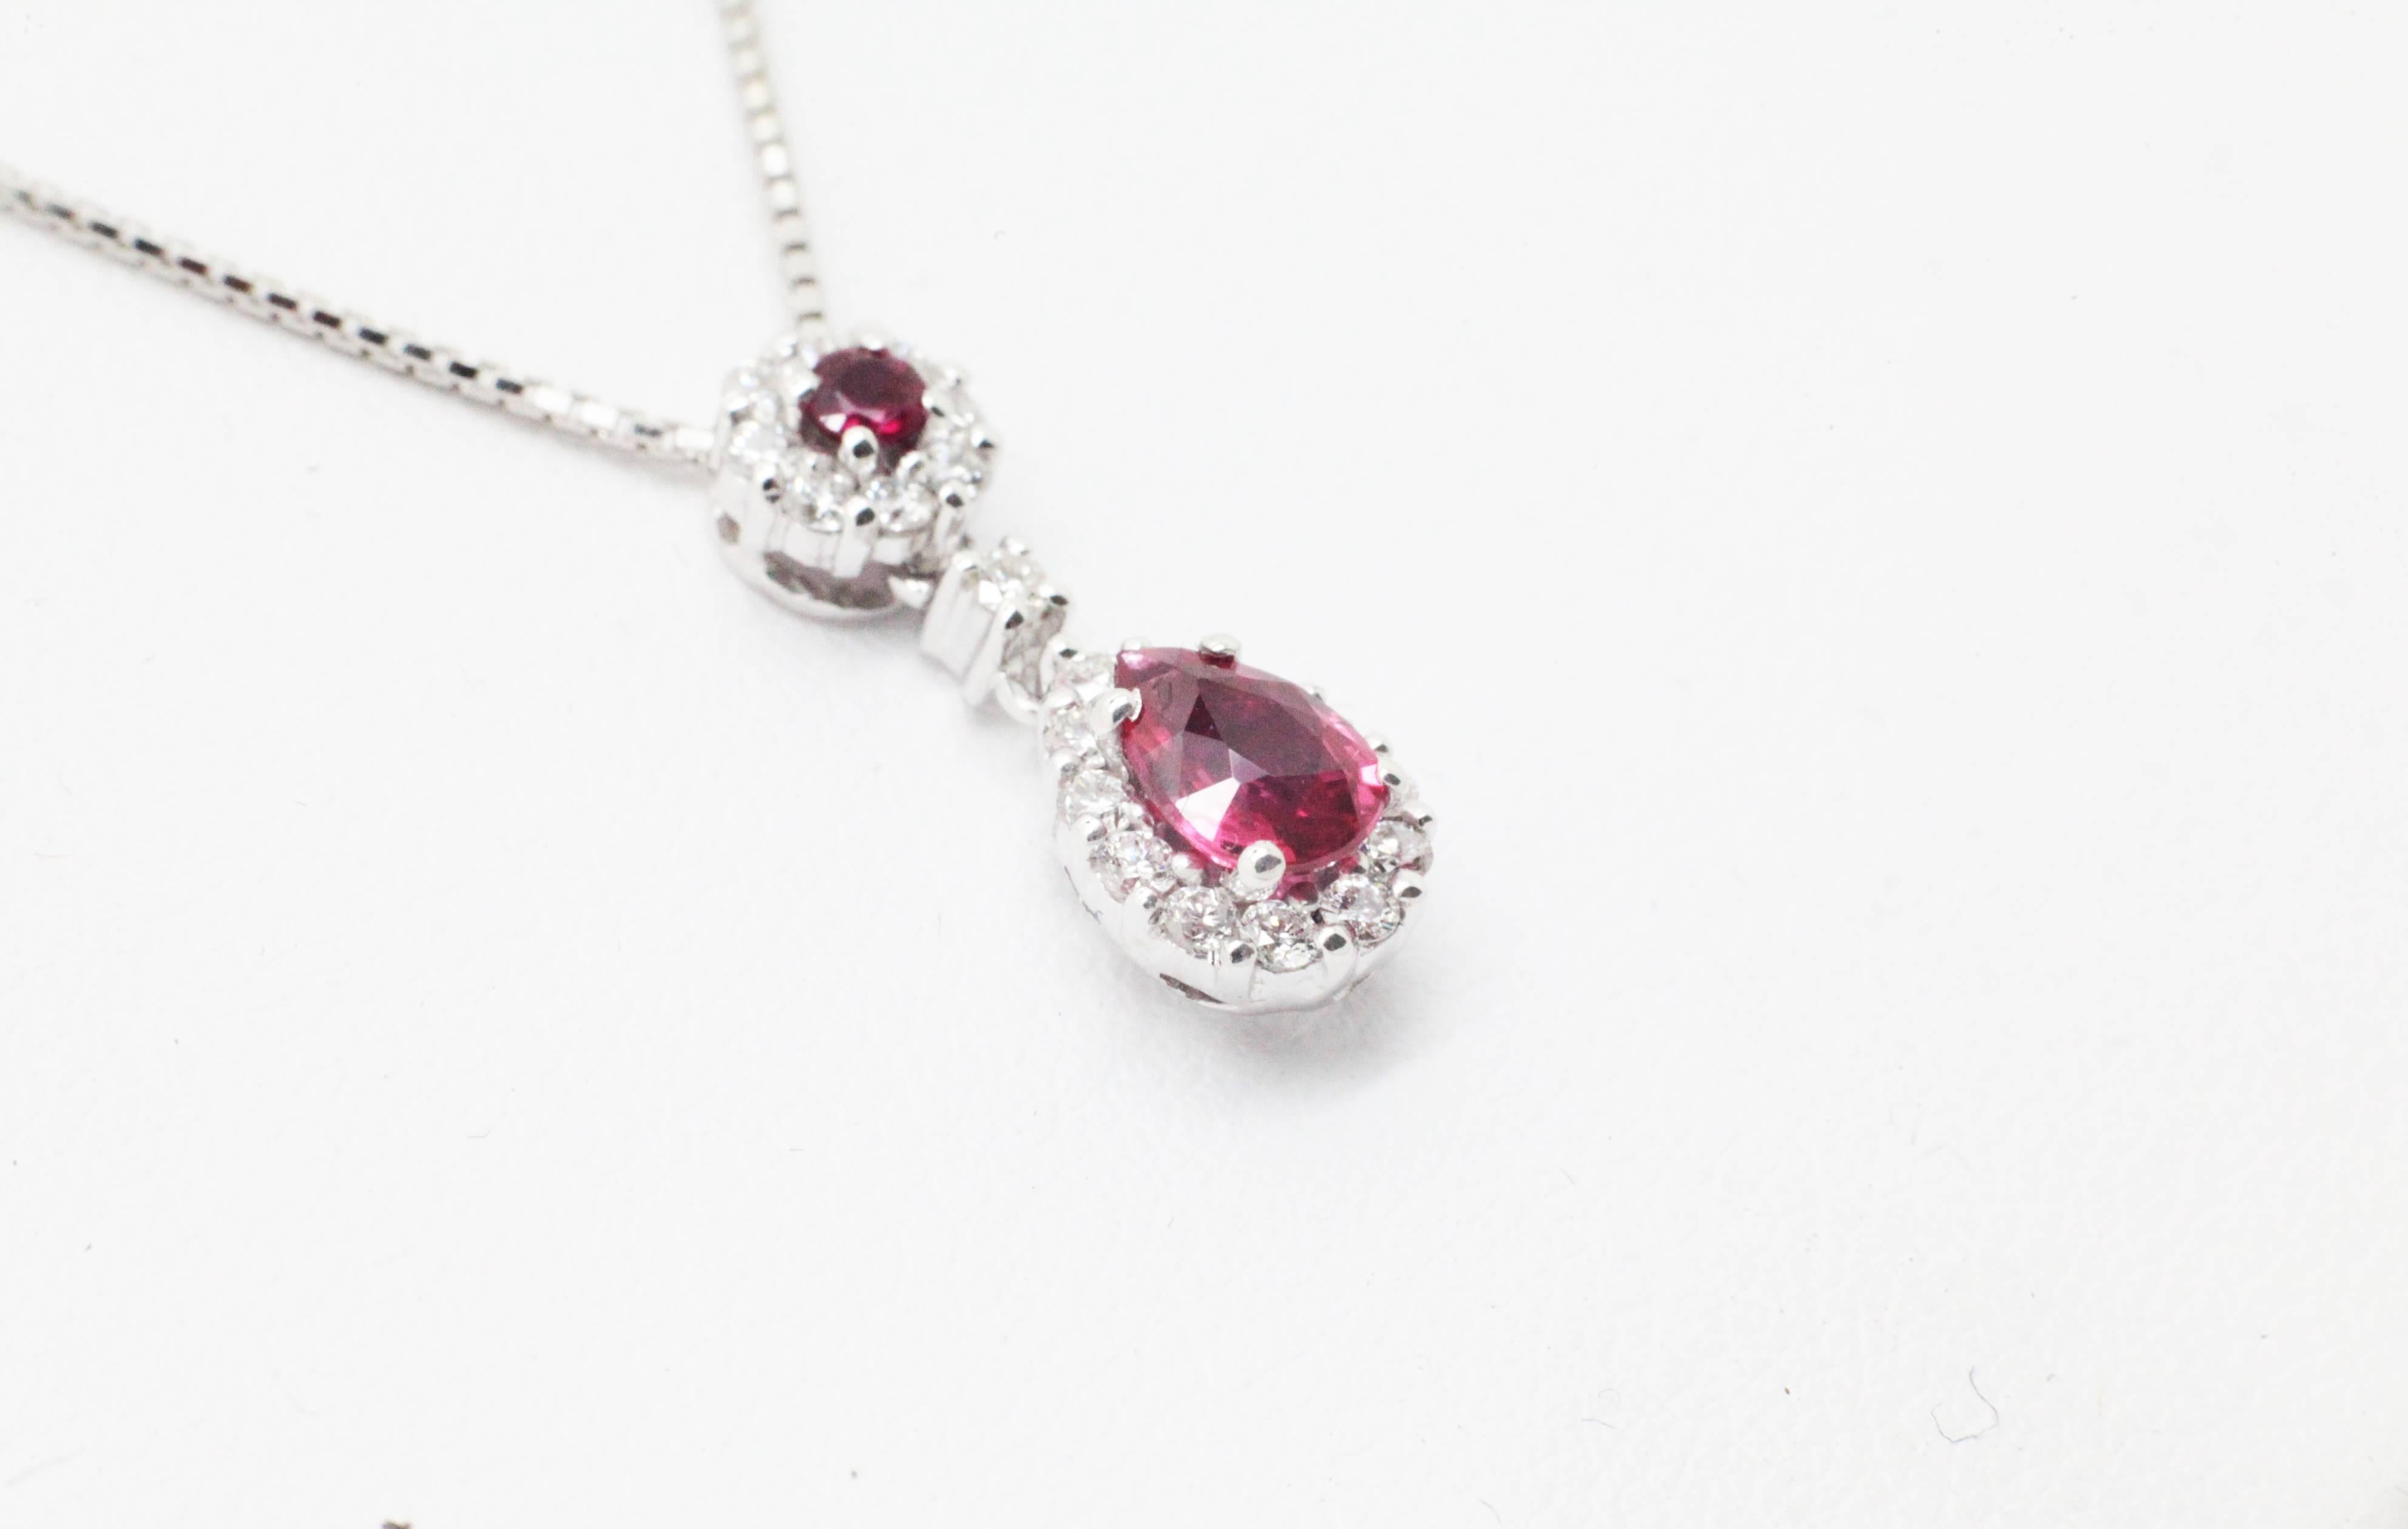 Fine piece from FERRUCCI & CO., a wonderful pear shape natural ruby and round ruby for a total carat weight of 0.56 carats, adorned by a white diamond halo of 0.30 carat weight, conceived in 18k white gold necklace made in Italy.

